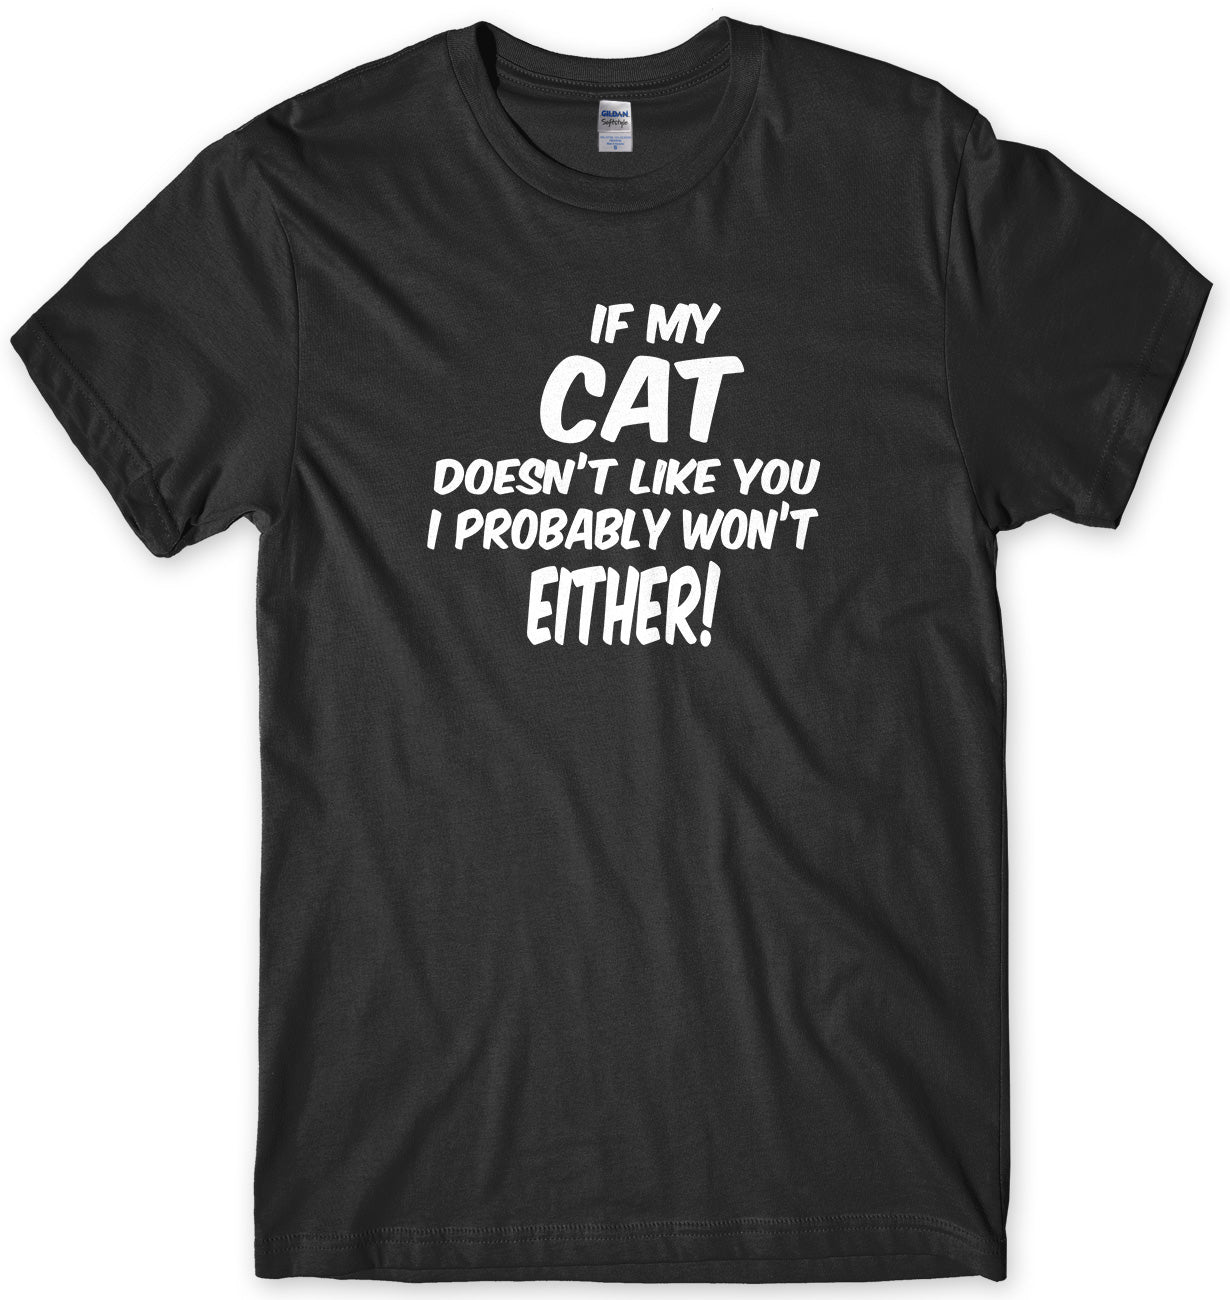 IF MY CAT DOESN'T LIKE YOU I PROBABLY WON'T EITHER MENS FUNNY SLOGAN UNISEX T-SHIRT